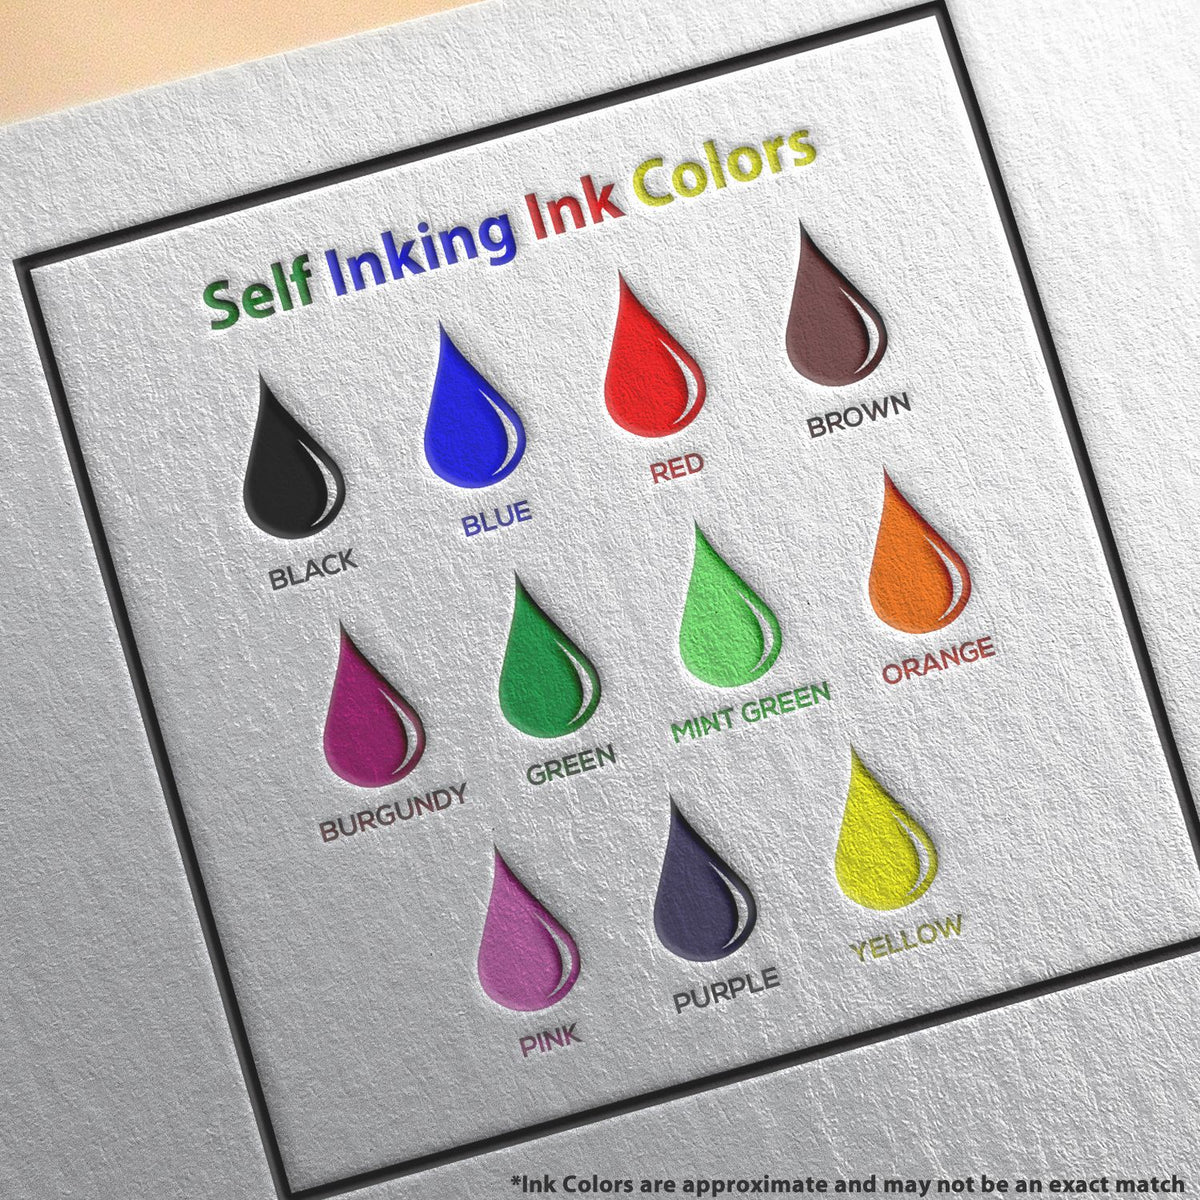 A picture showing the different ink colors or hues available for the Self-Inking Nevada Geologist Stamp